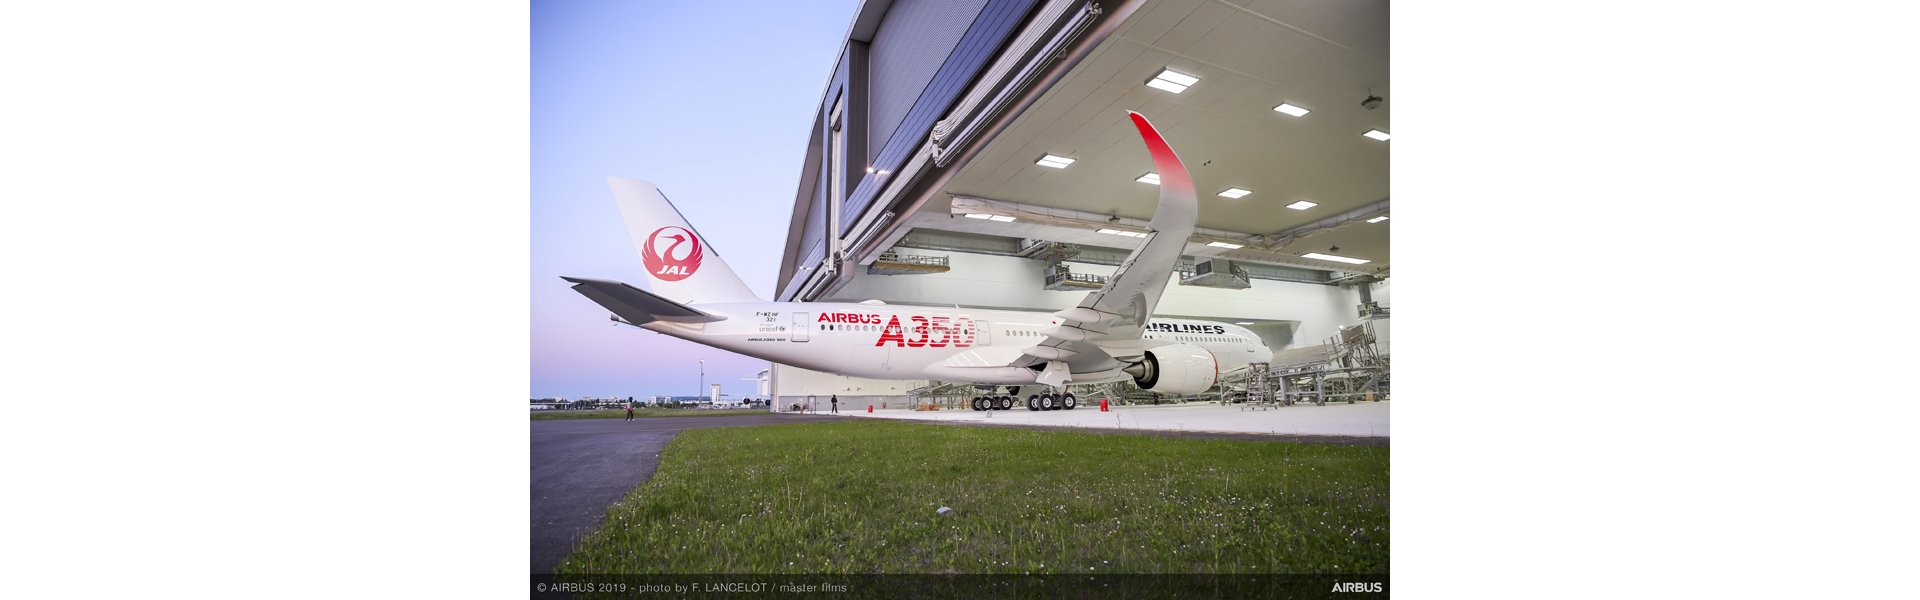 First Jal A350 900 Rolls Out Of Airbus Paint Shop Commercial Aircraft Airbus